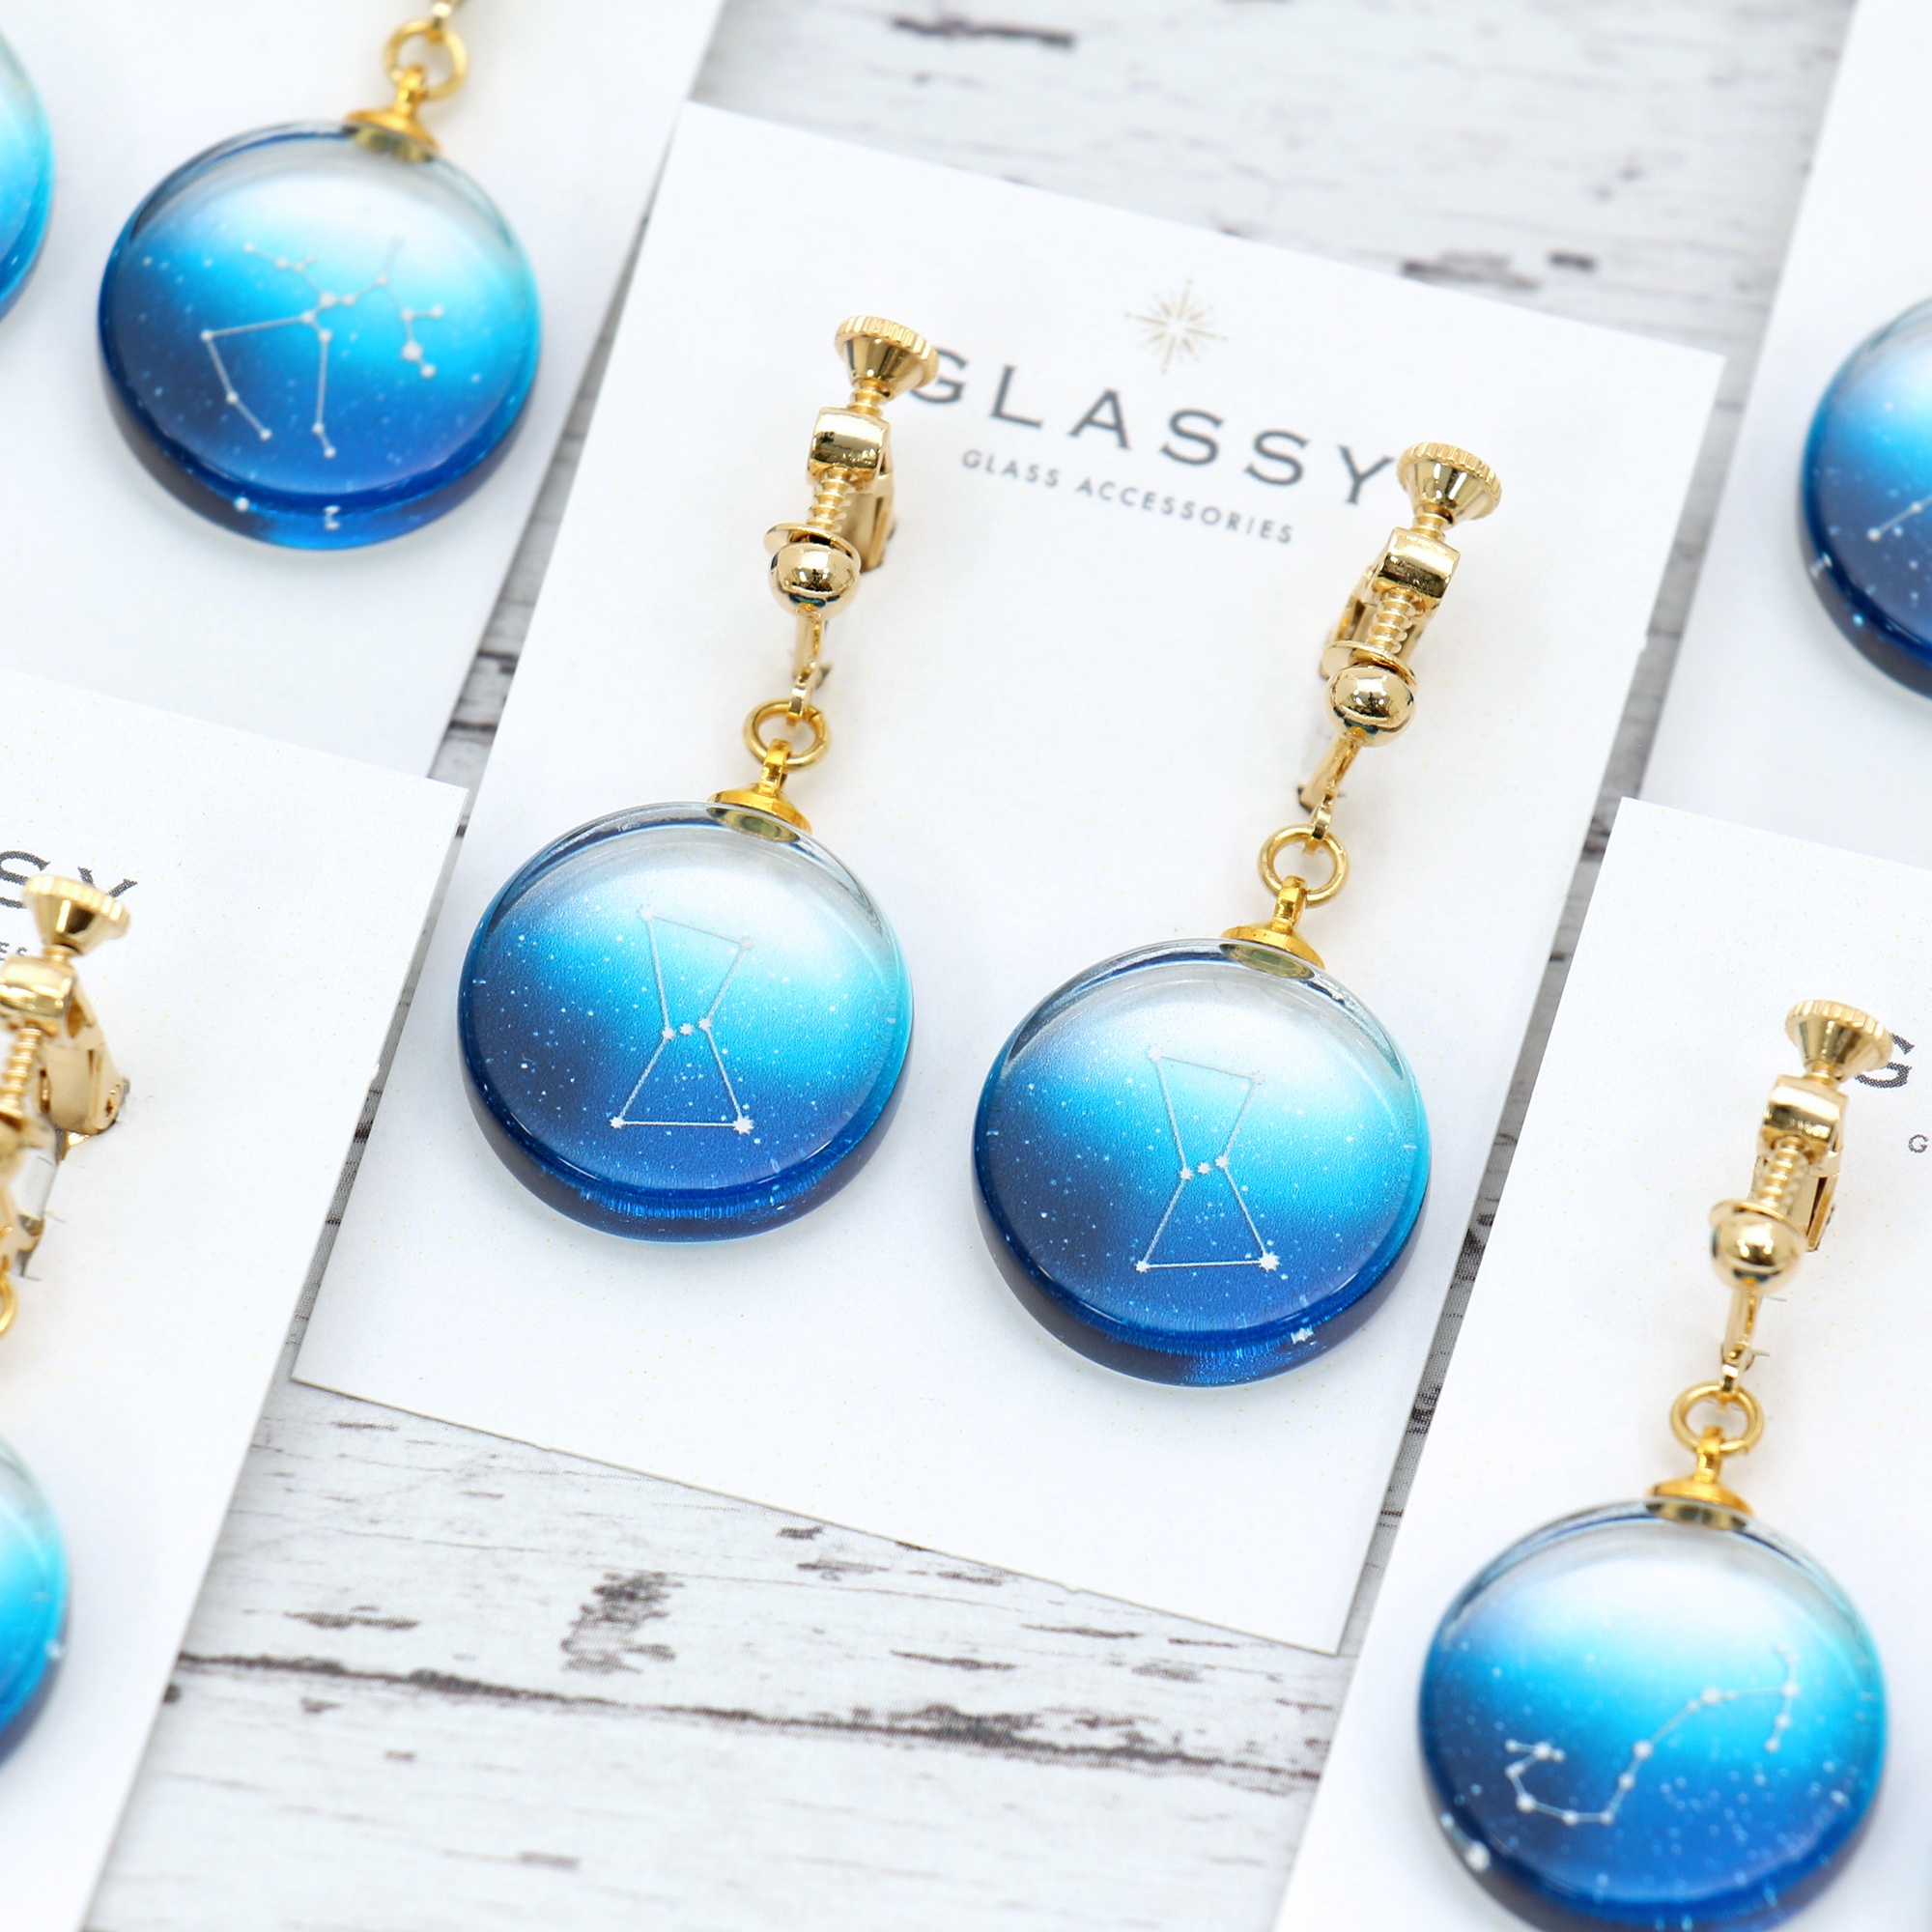 Glass accessories Earring CONSTELLATION Cancer round shape